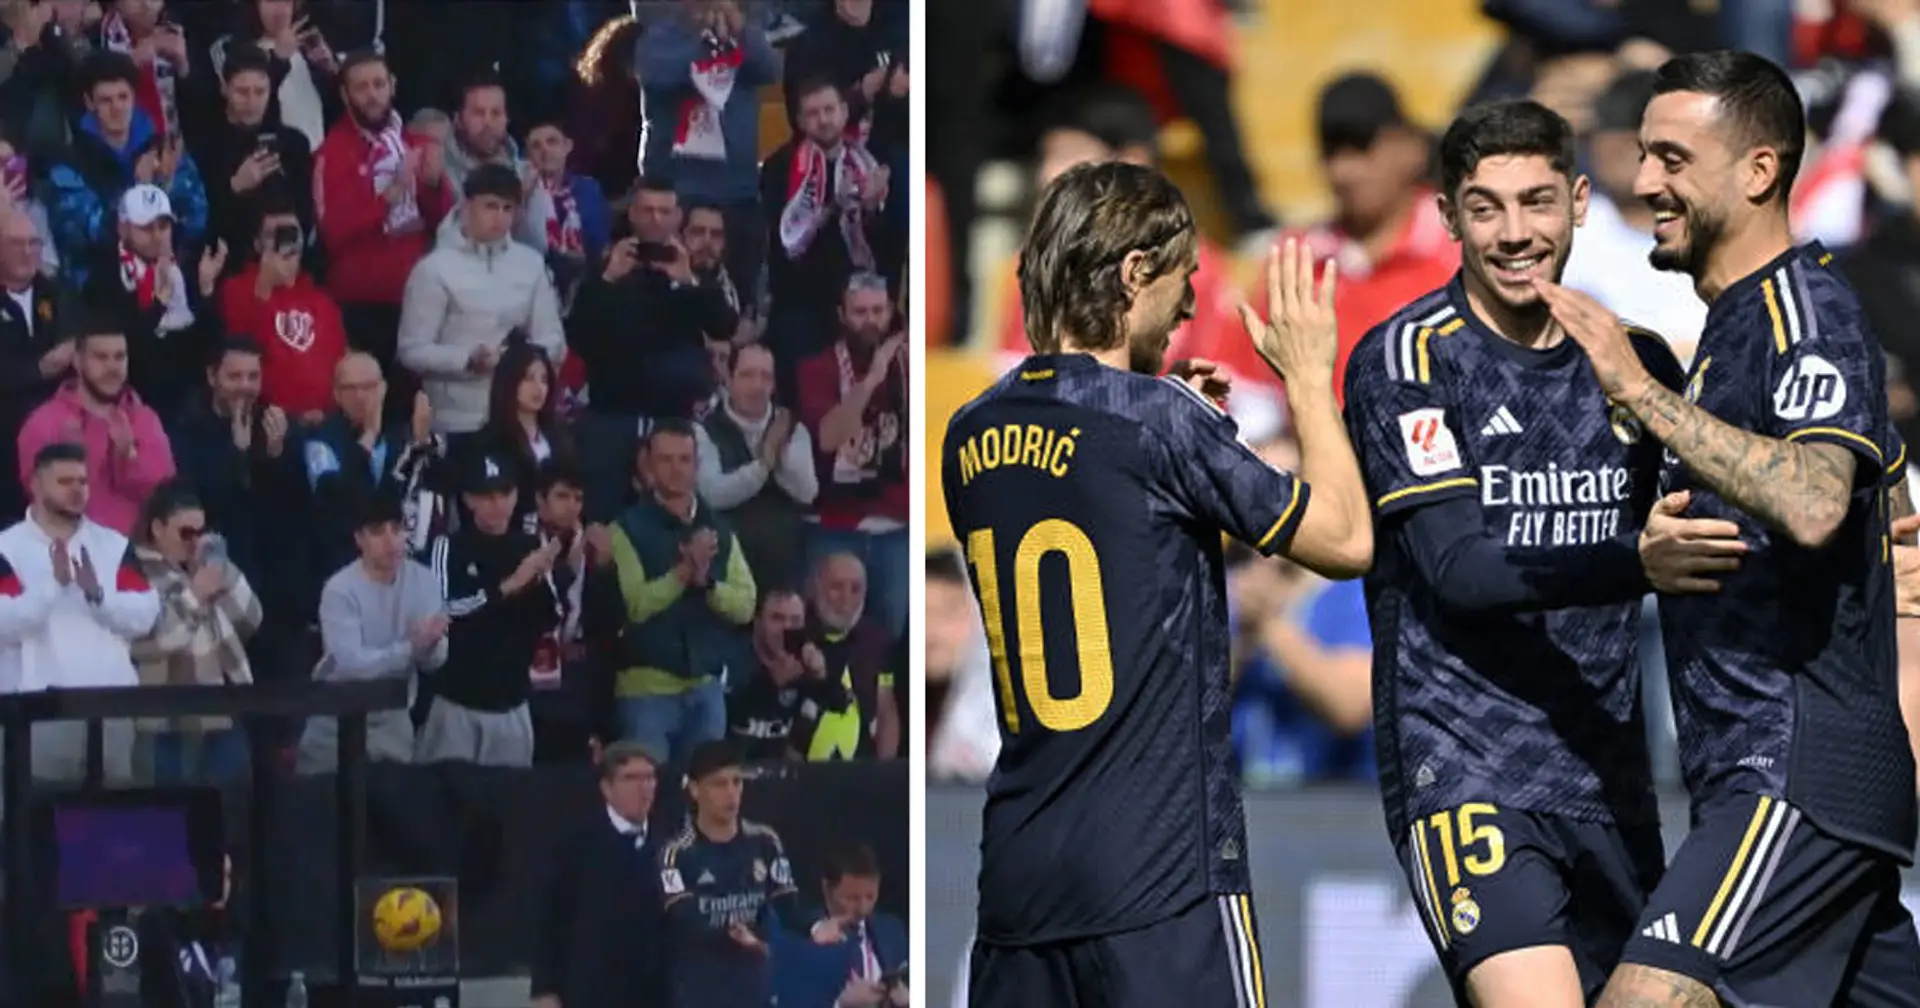 One Real Madrid player given a standing ovation as he was coming off the pitch against Rayo Vallecano